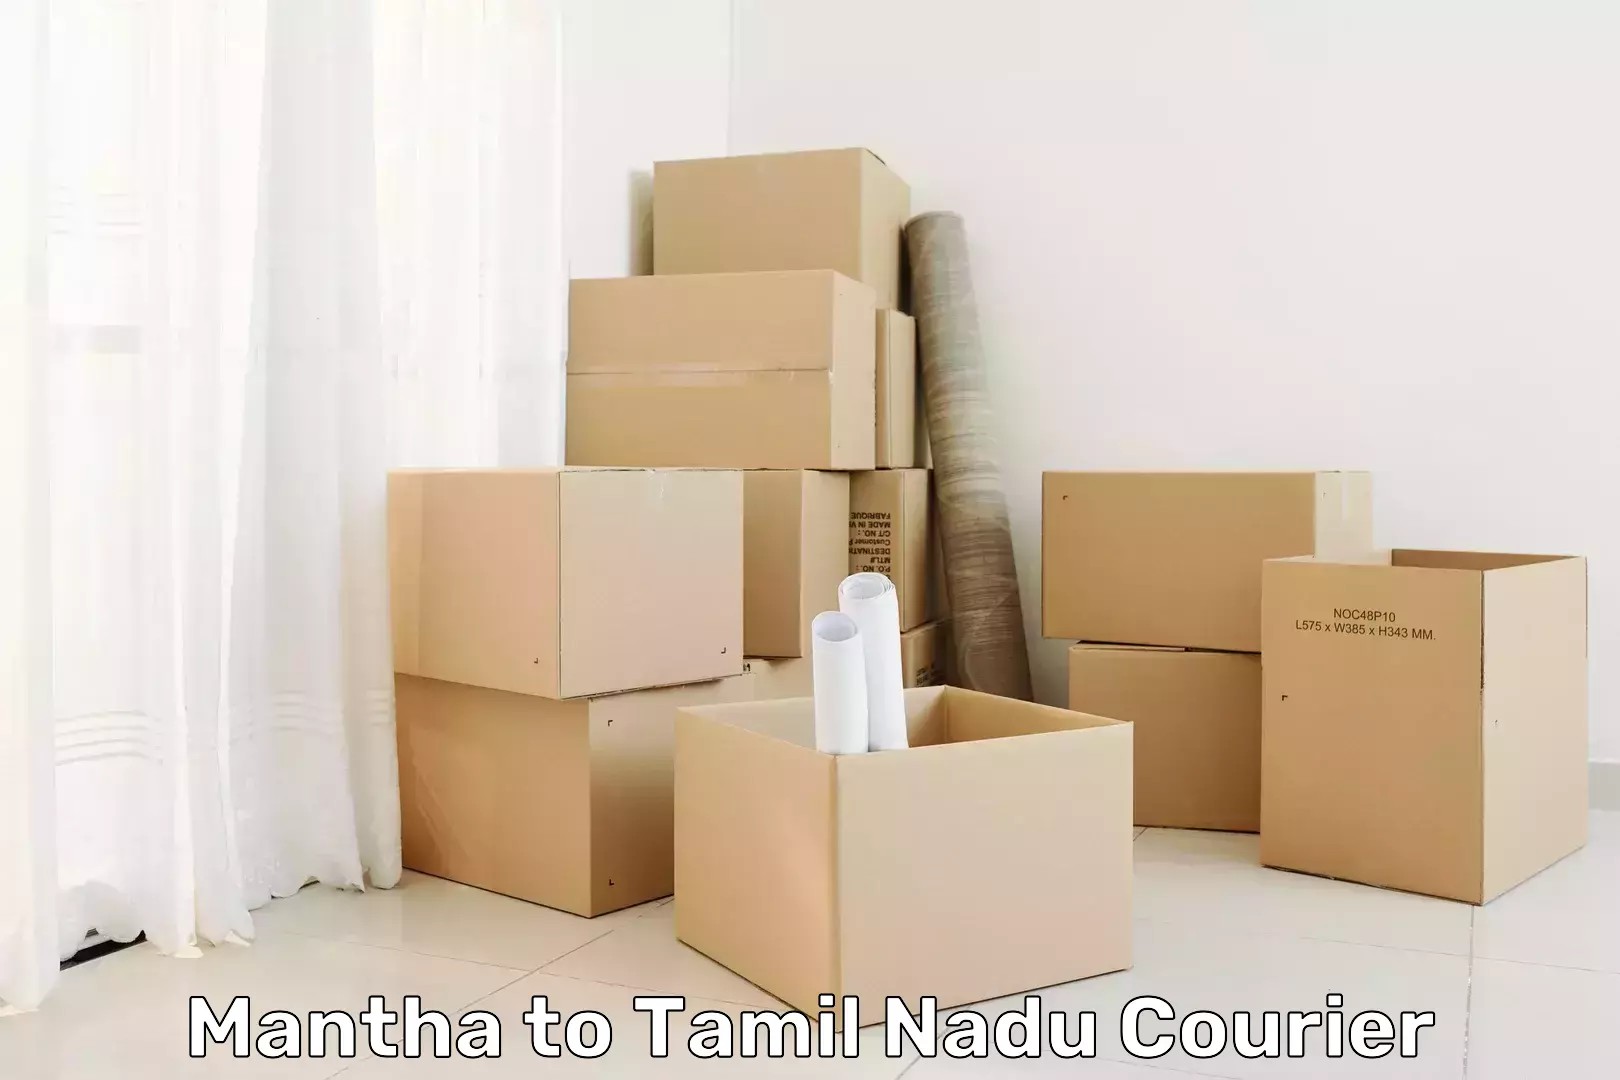 Speedy delivery service Mantha to Coimbatore